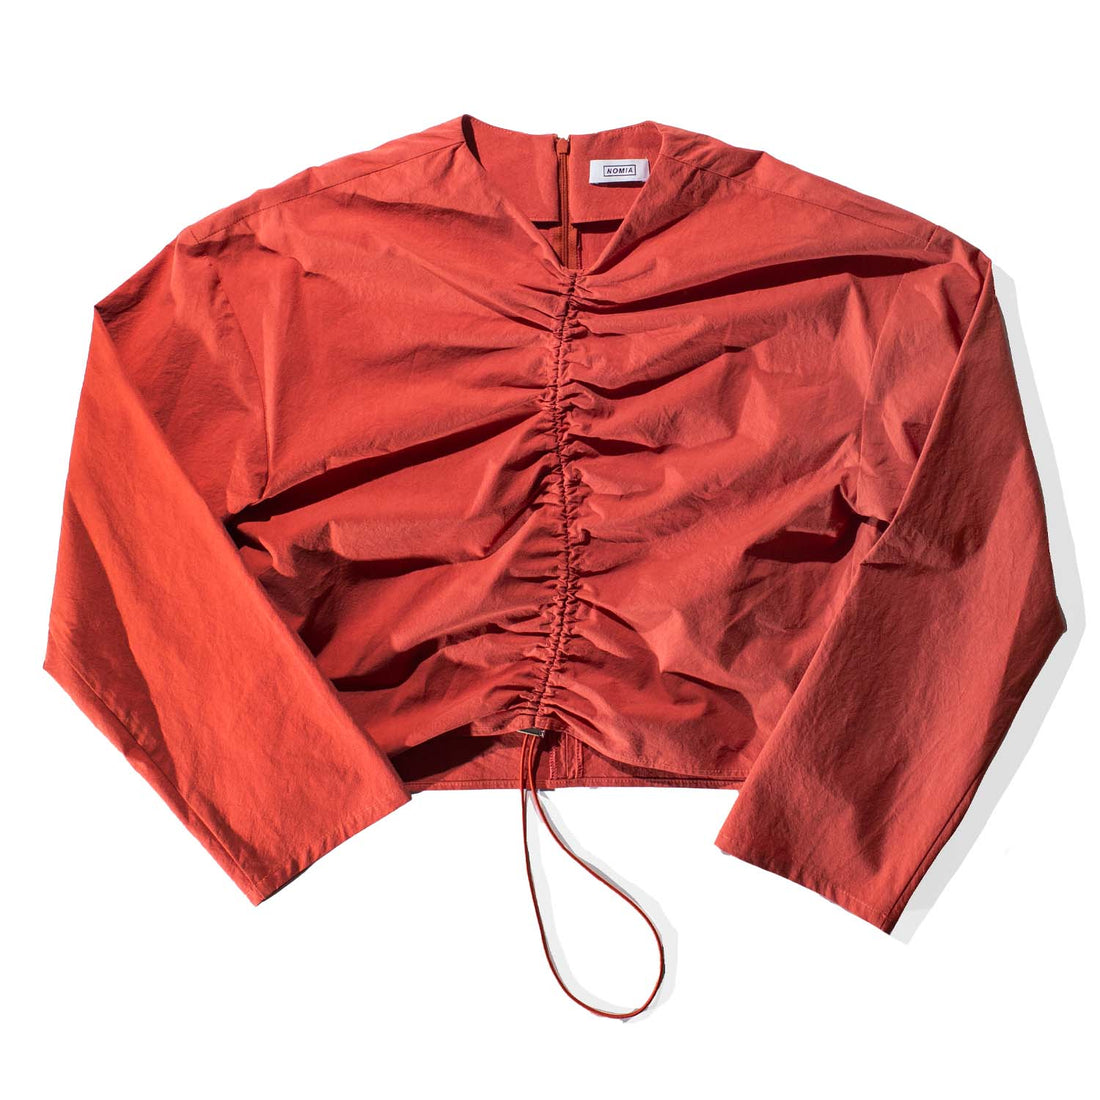 Nomia Bungee Gathered Long Sleeve Top in Persimmon